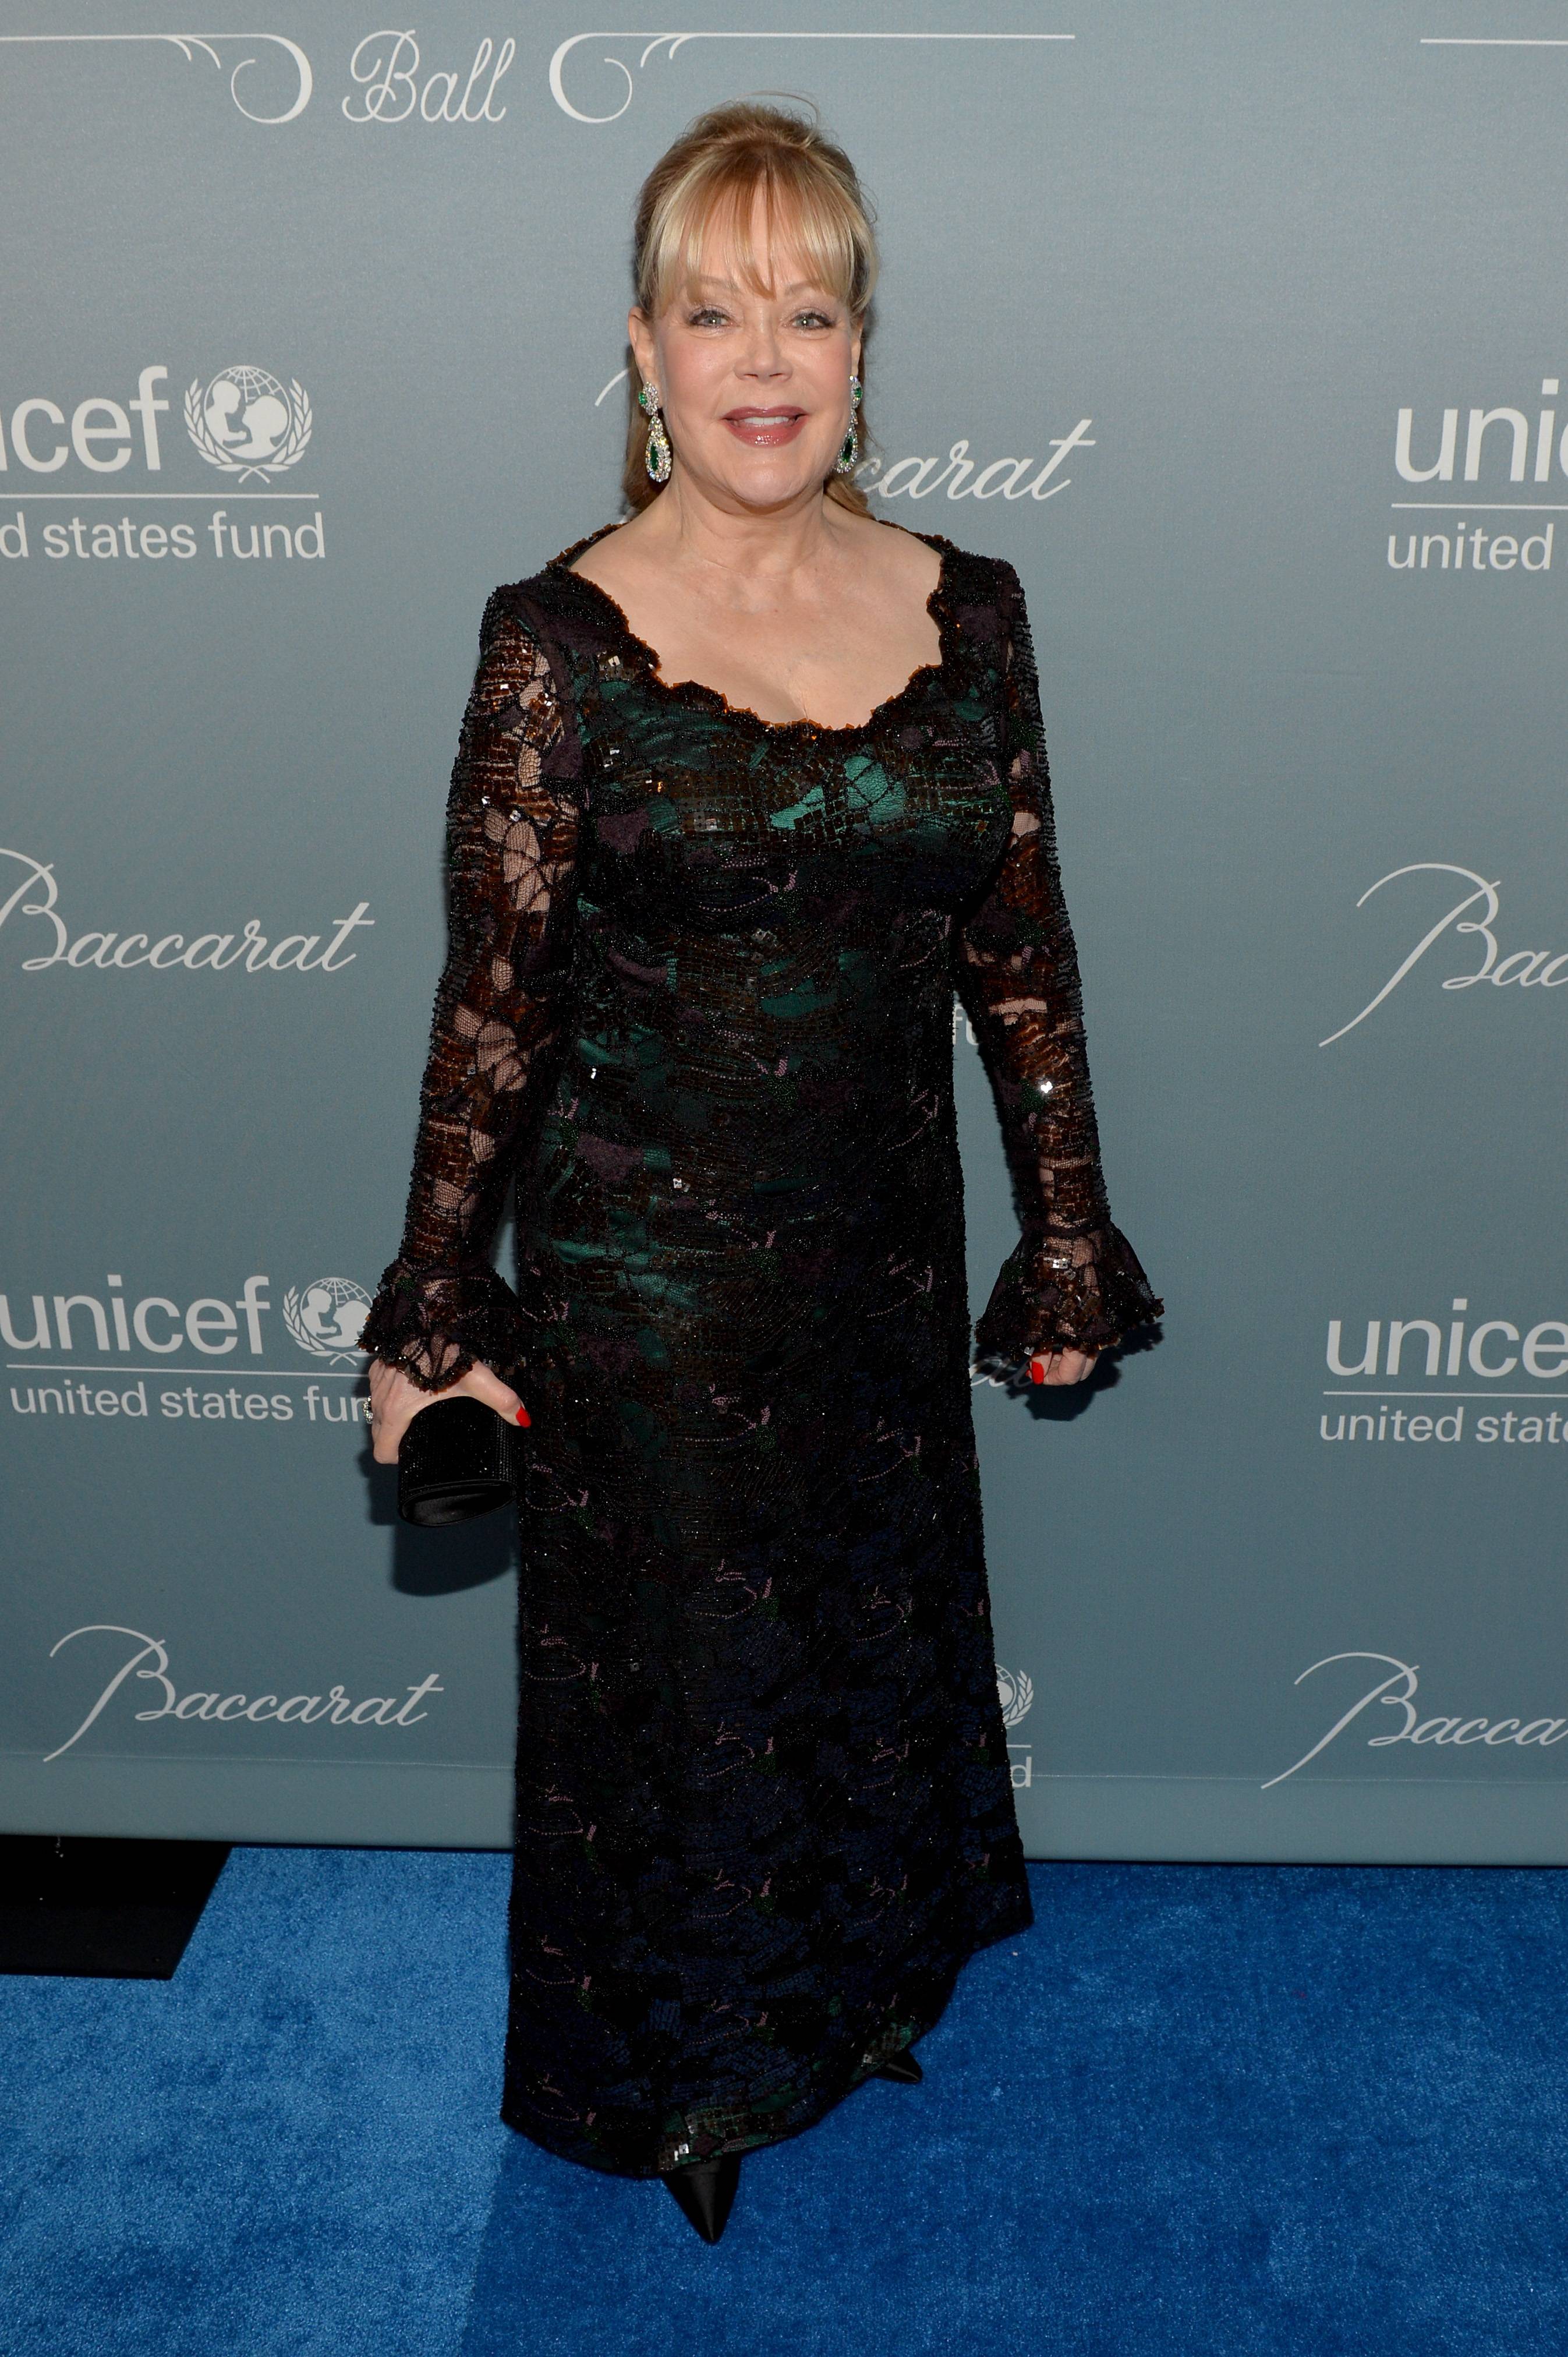 The 2014 UNICEF Ball Presented By Baccarat - Red Carpet